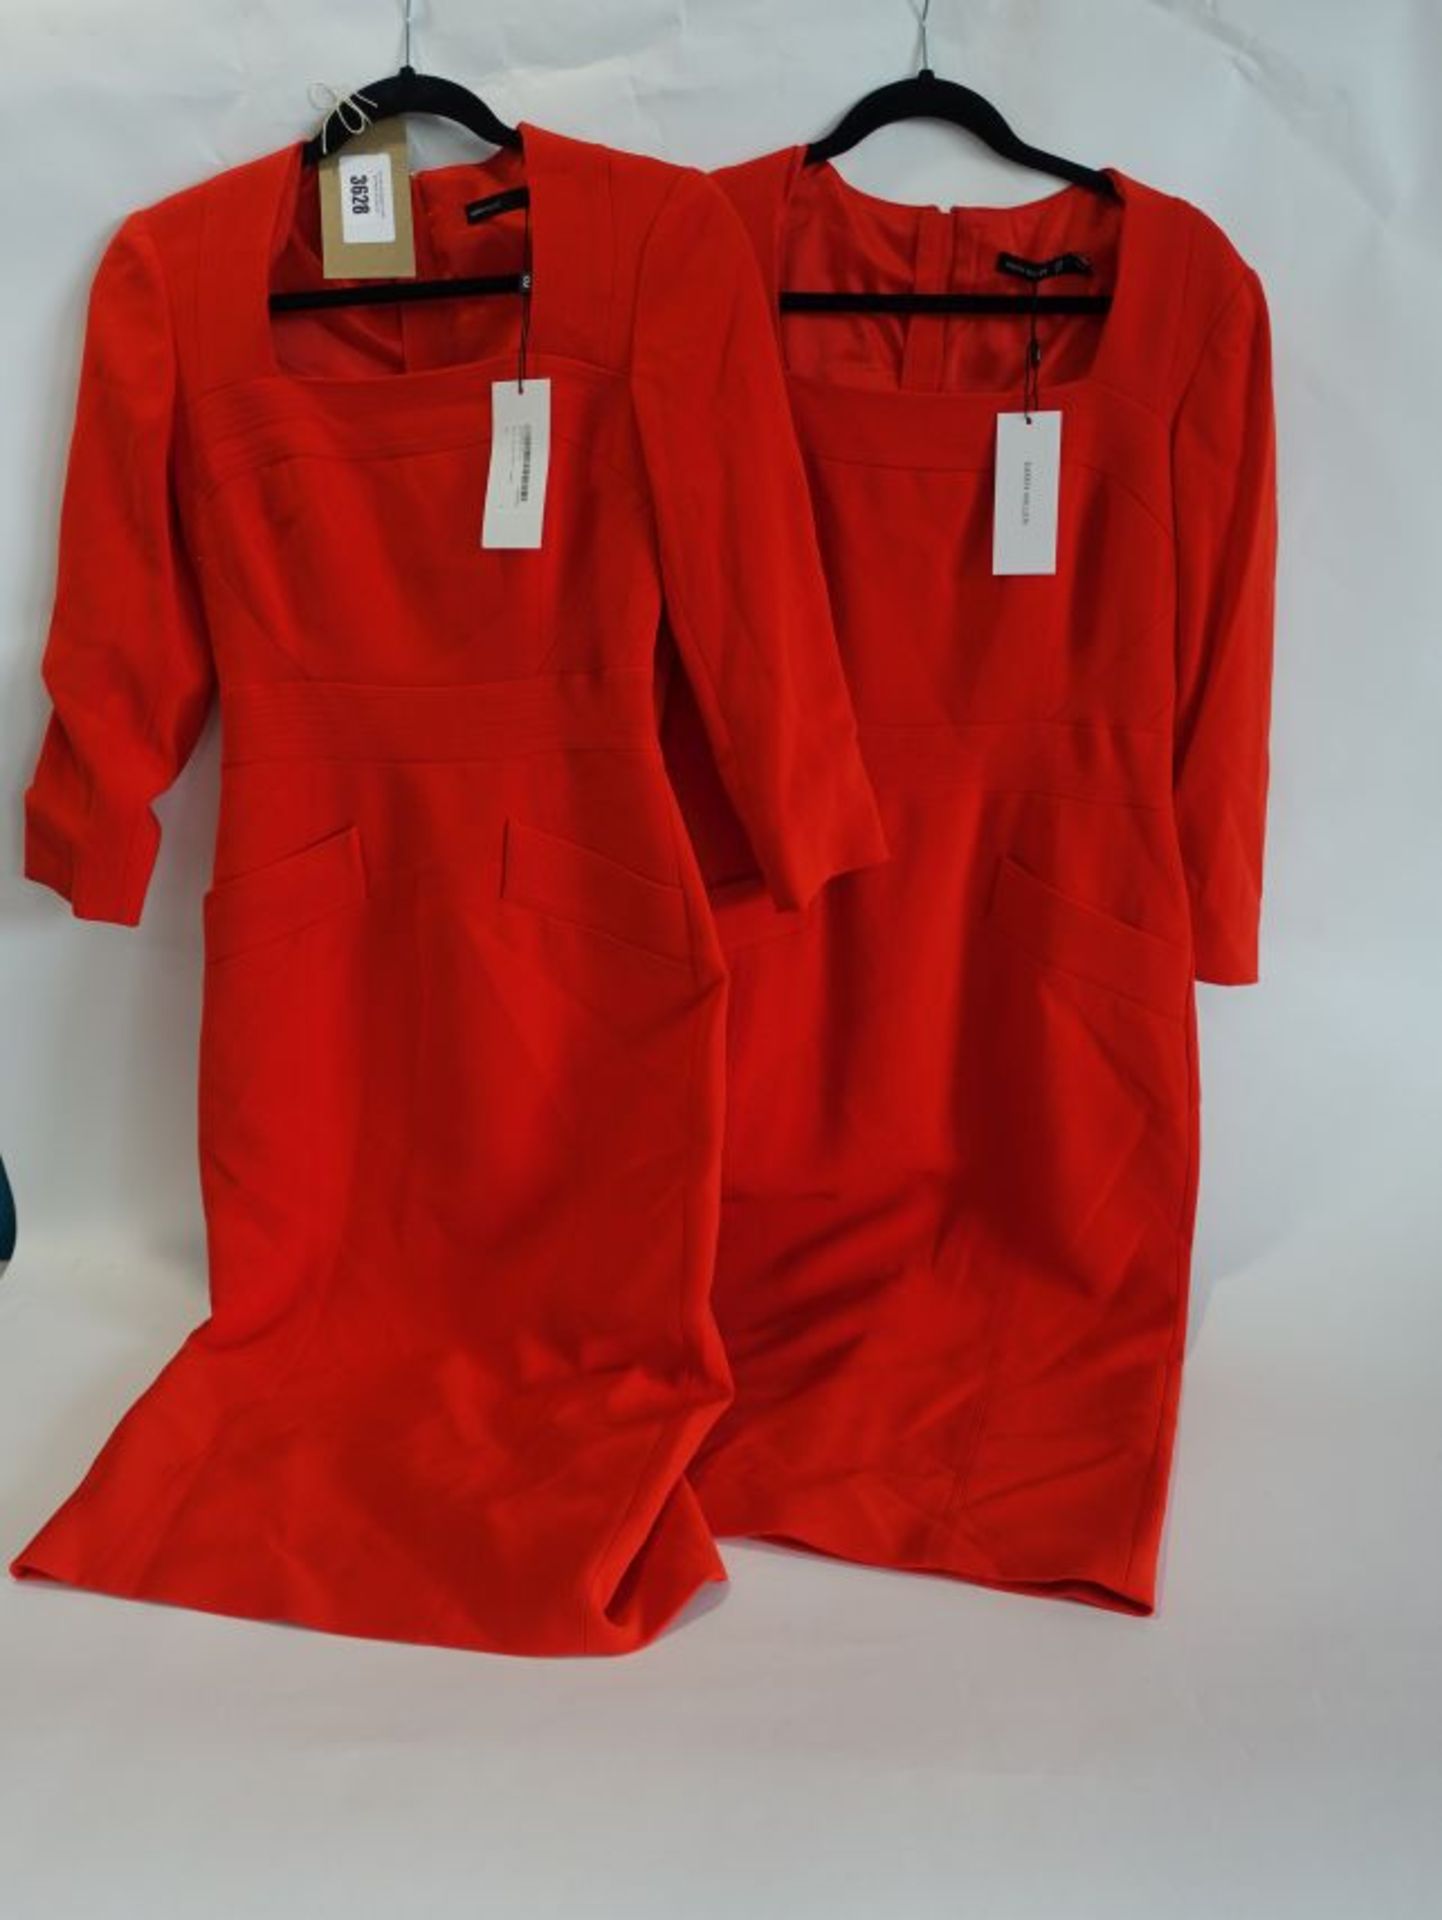 Two Karen Millen red pencil dresses size 6 and size 14